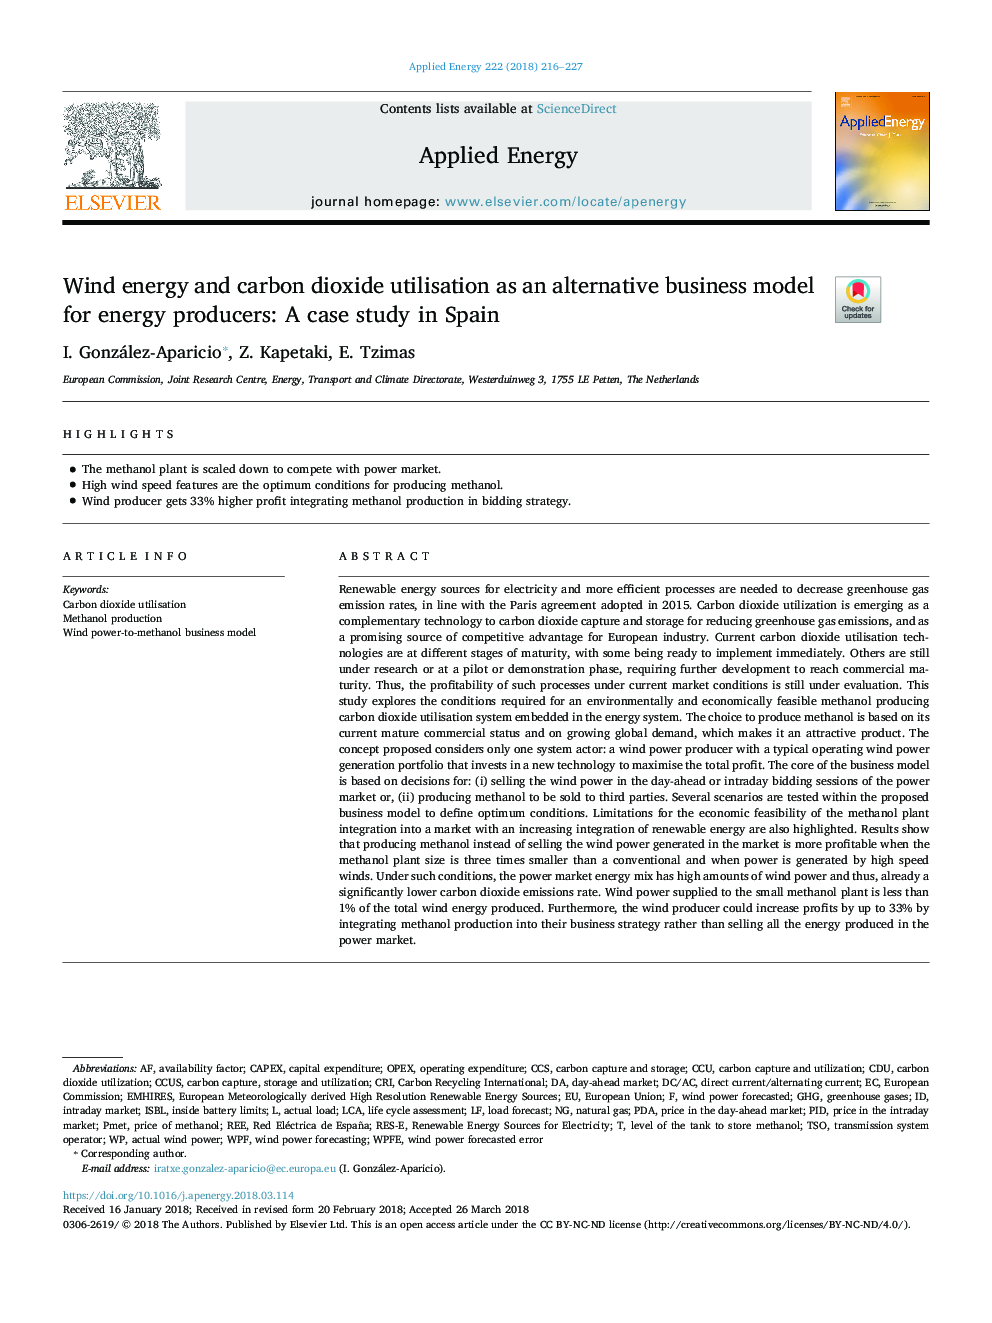 Wind energy and carbon dioxide utilisation as an alternative business model for energy producers: A case study in Spain